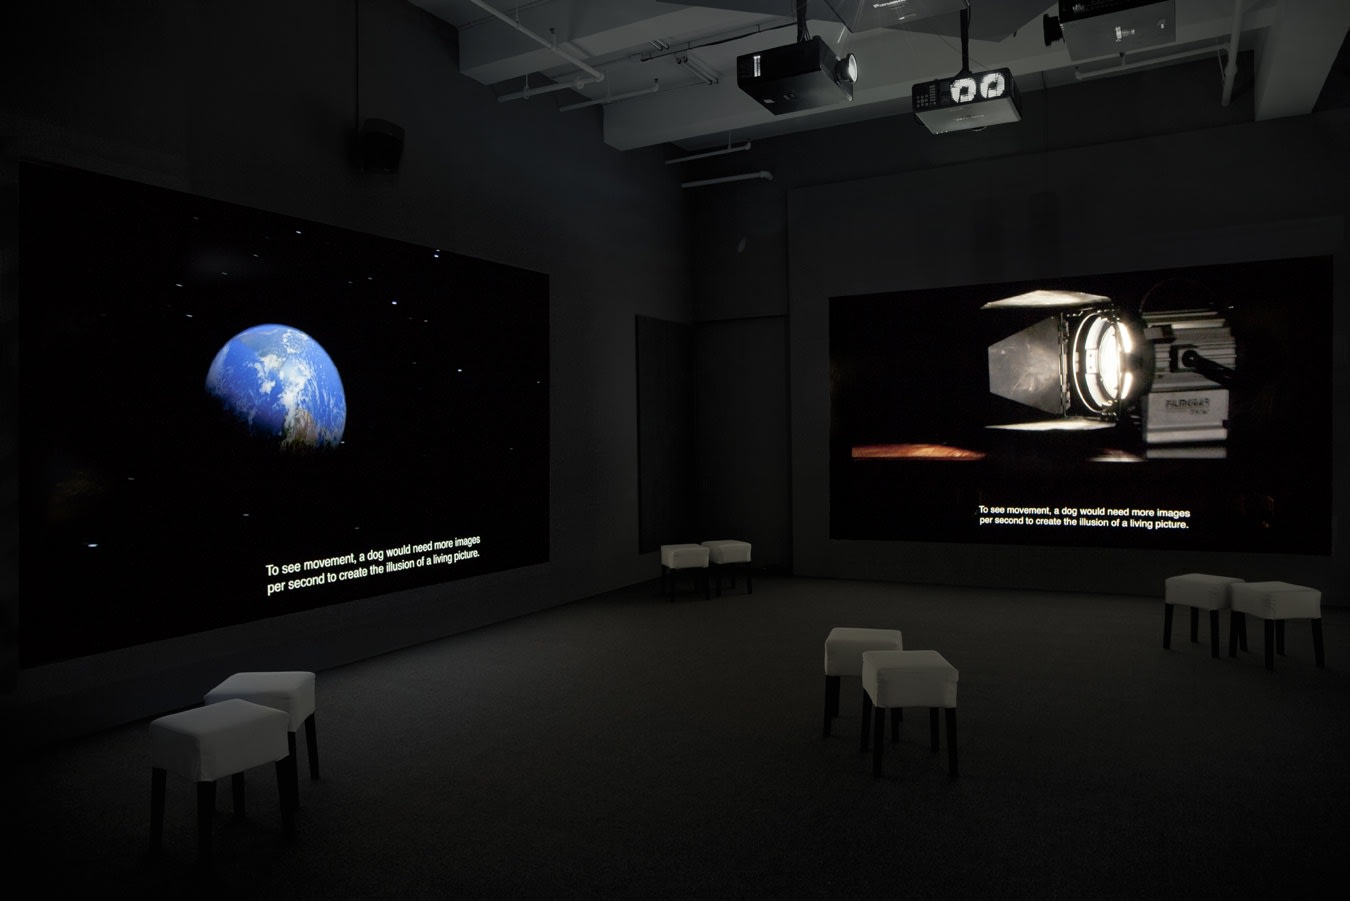 Two screens projecting space related images. The earth on the left screen and mechanics from a spaceship on the right.